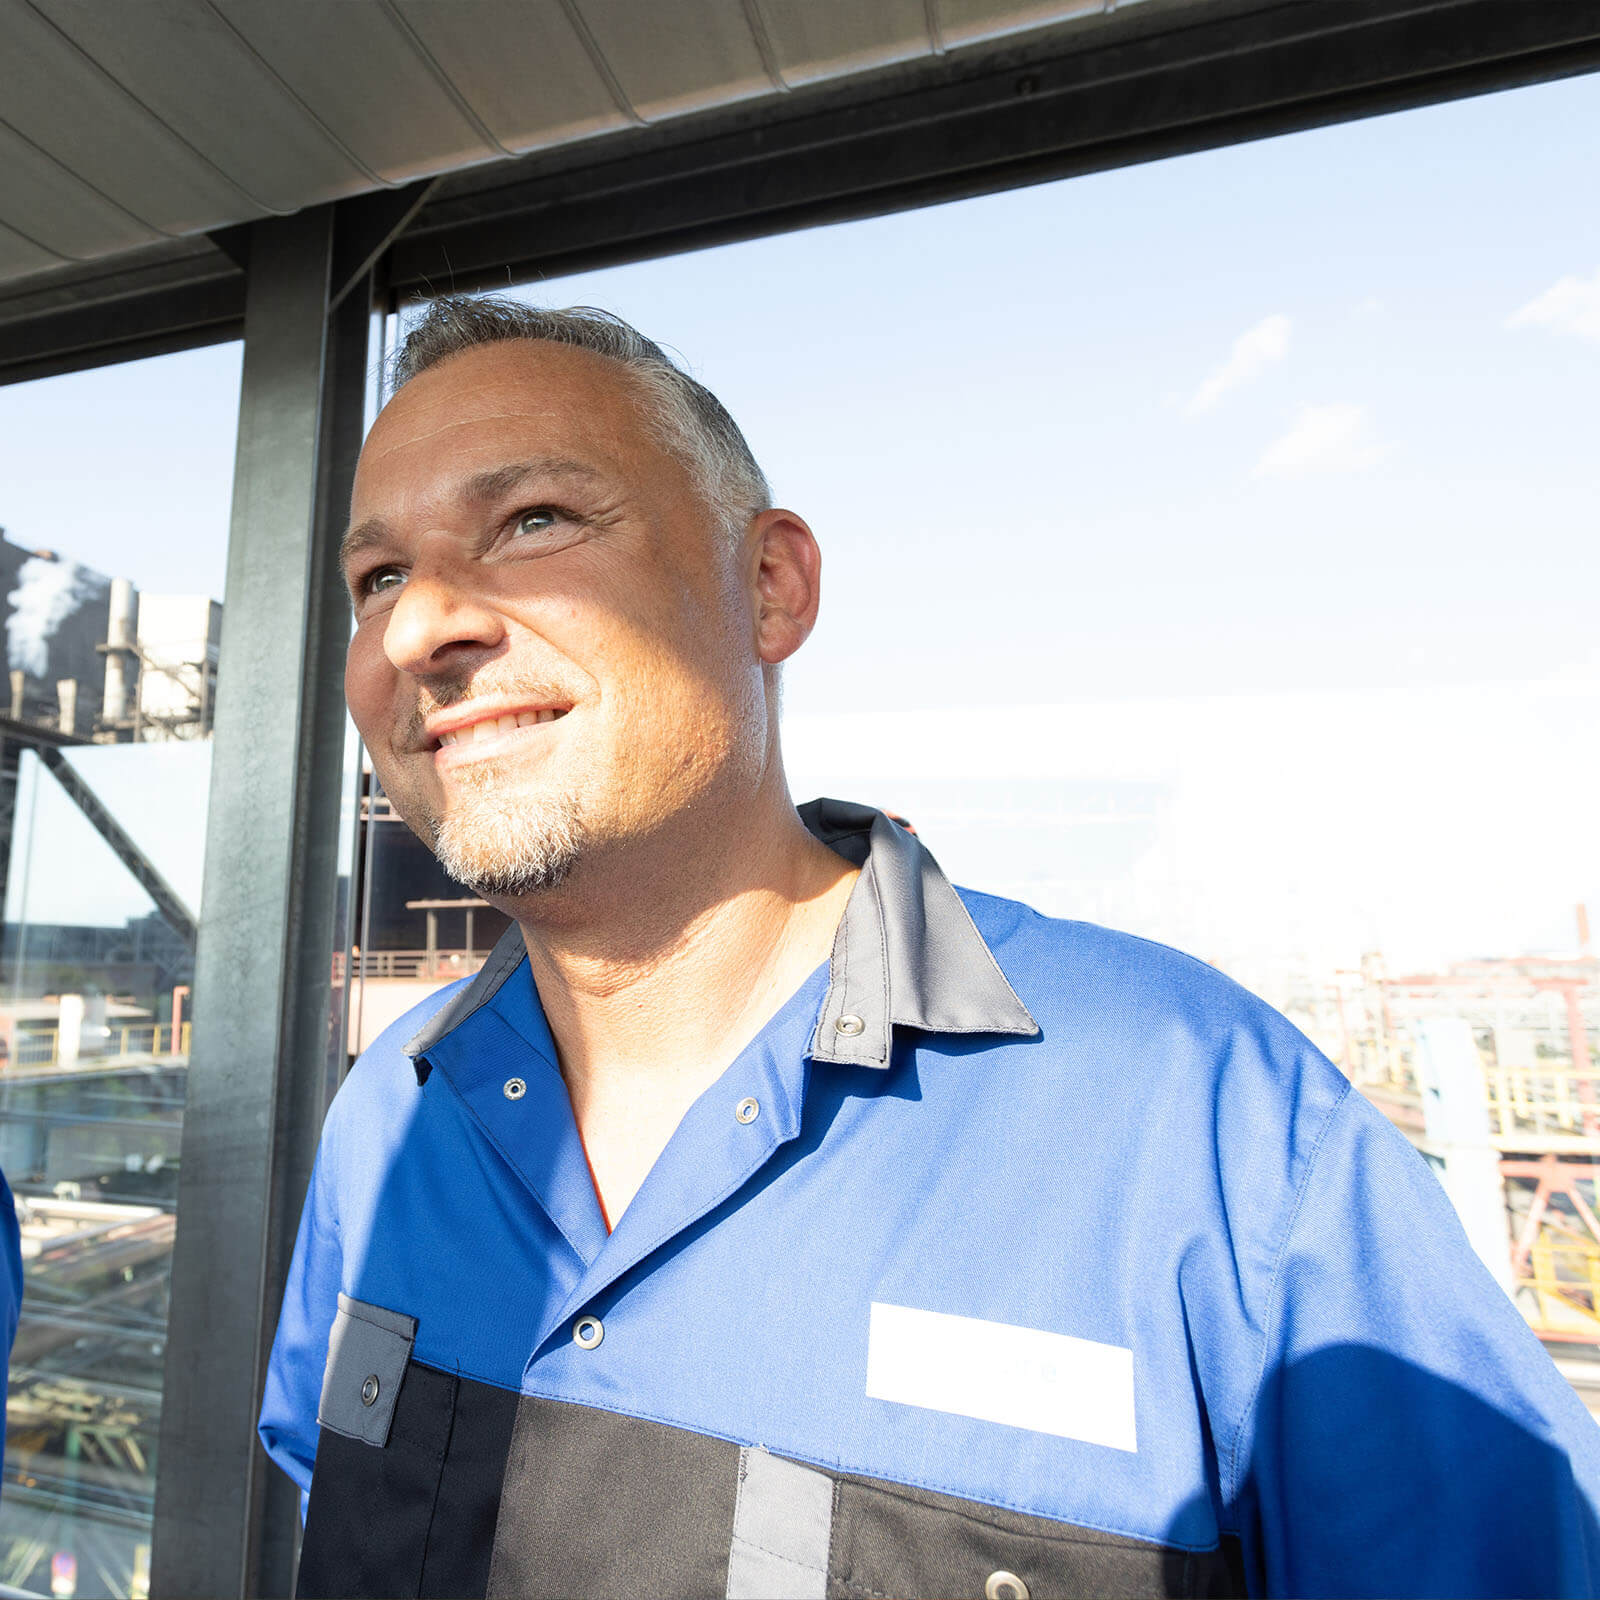 Markus, a vosetalpine employee, wears blue and black work clothes and smiles as he looks past to the left of the camera